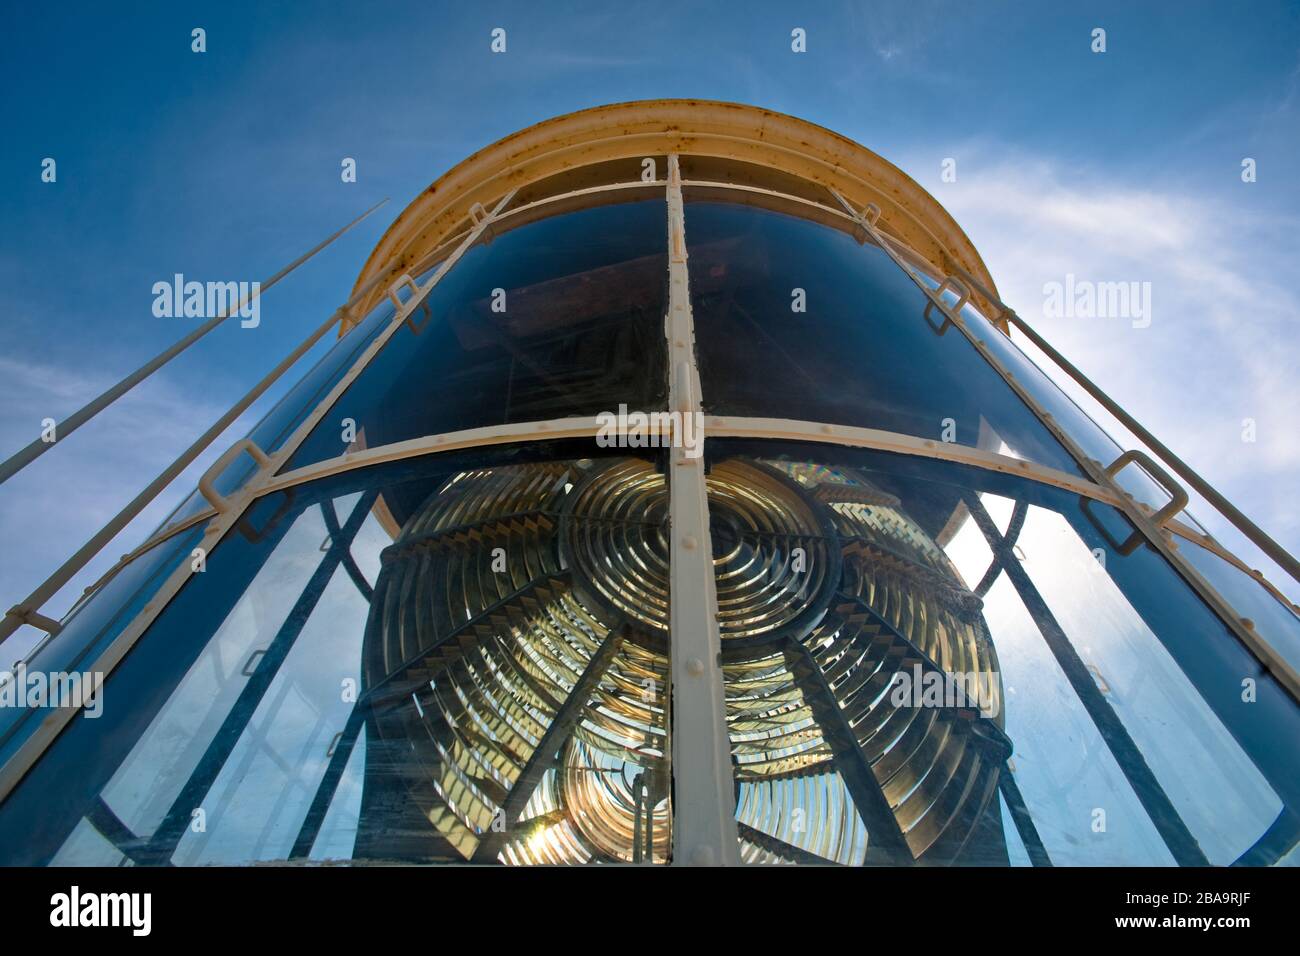 The fresnel bulb and lens of the lantern room a top of the Cape Leeuwin lighthouse, Albany, Western Australia. Stock Photo